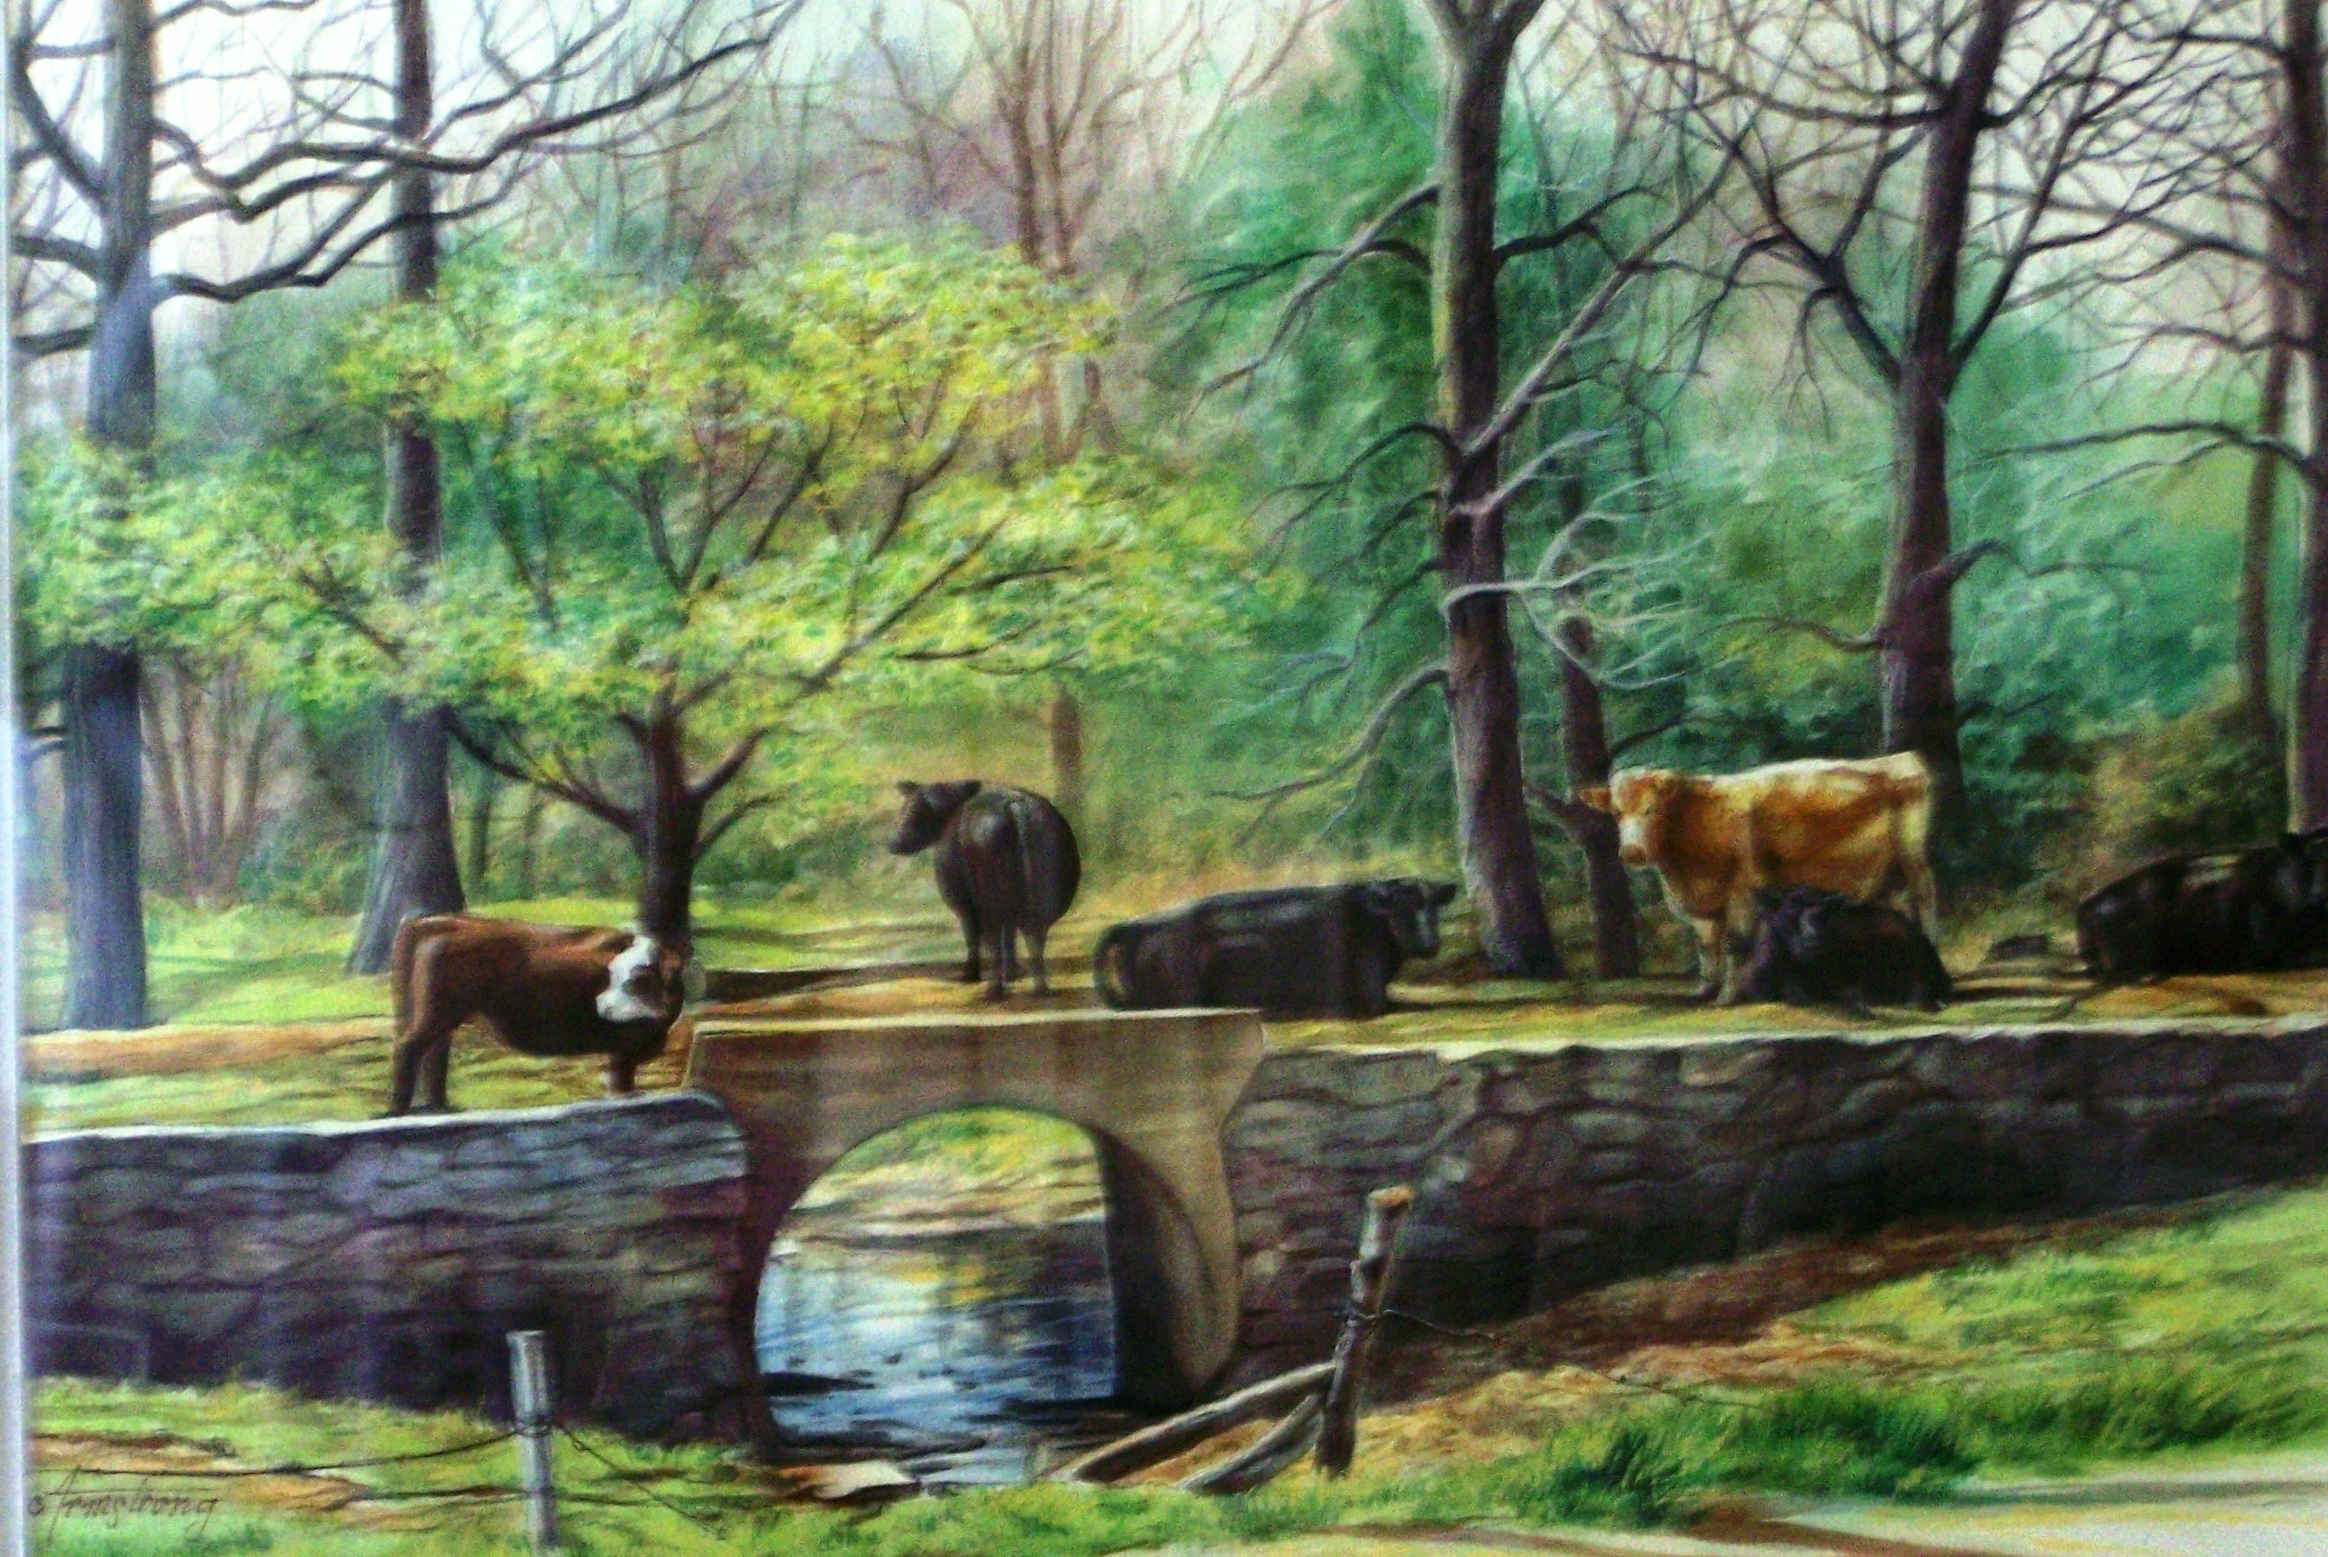 "Pasture to Bolivar" watercolor